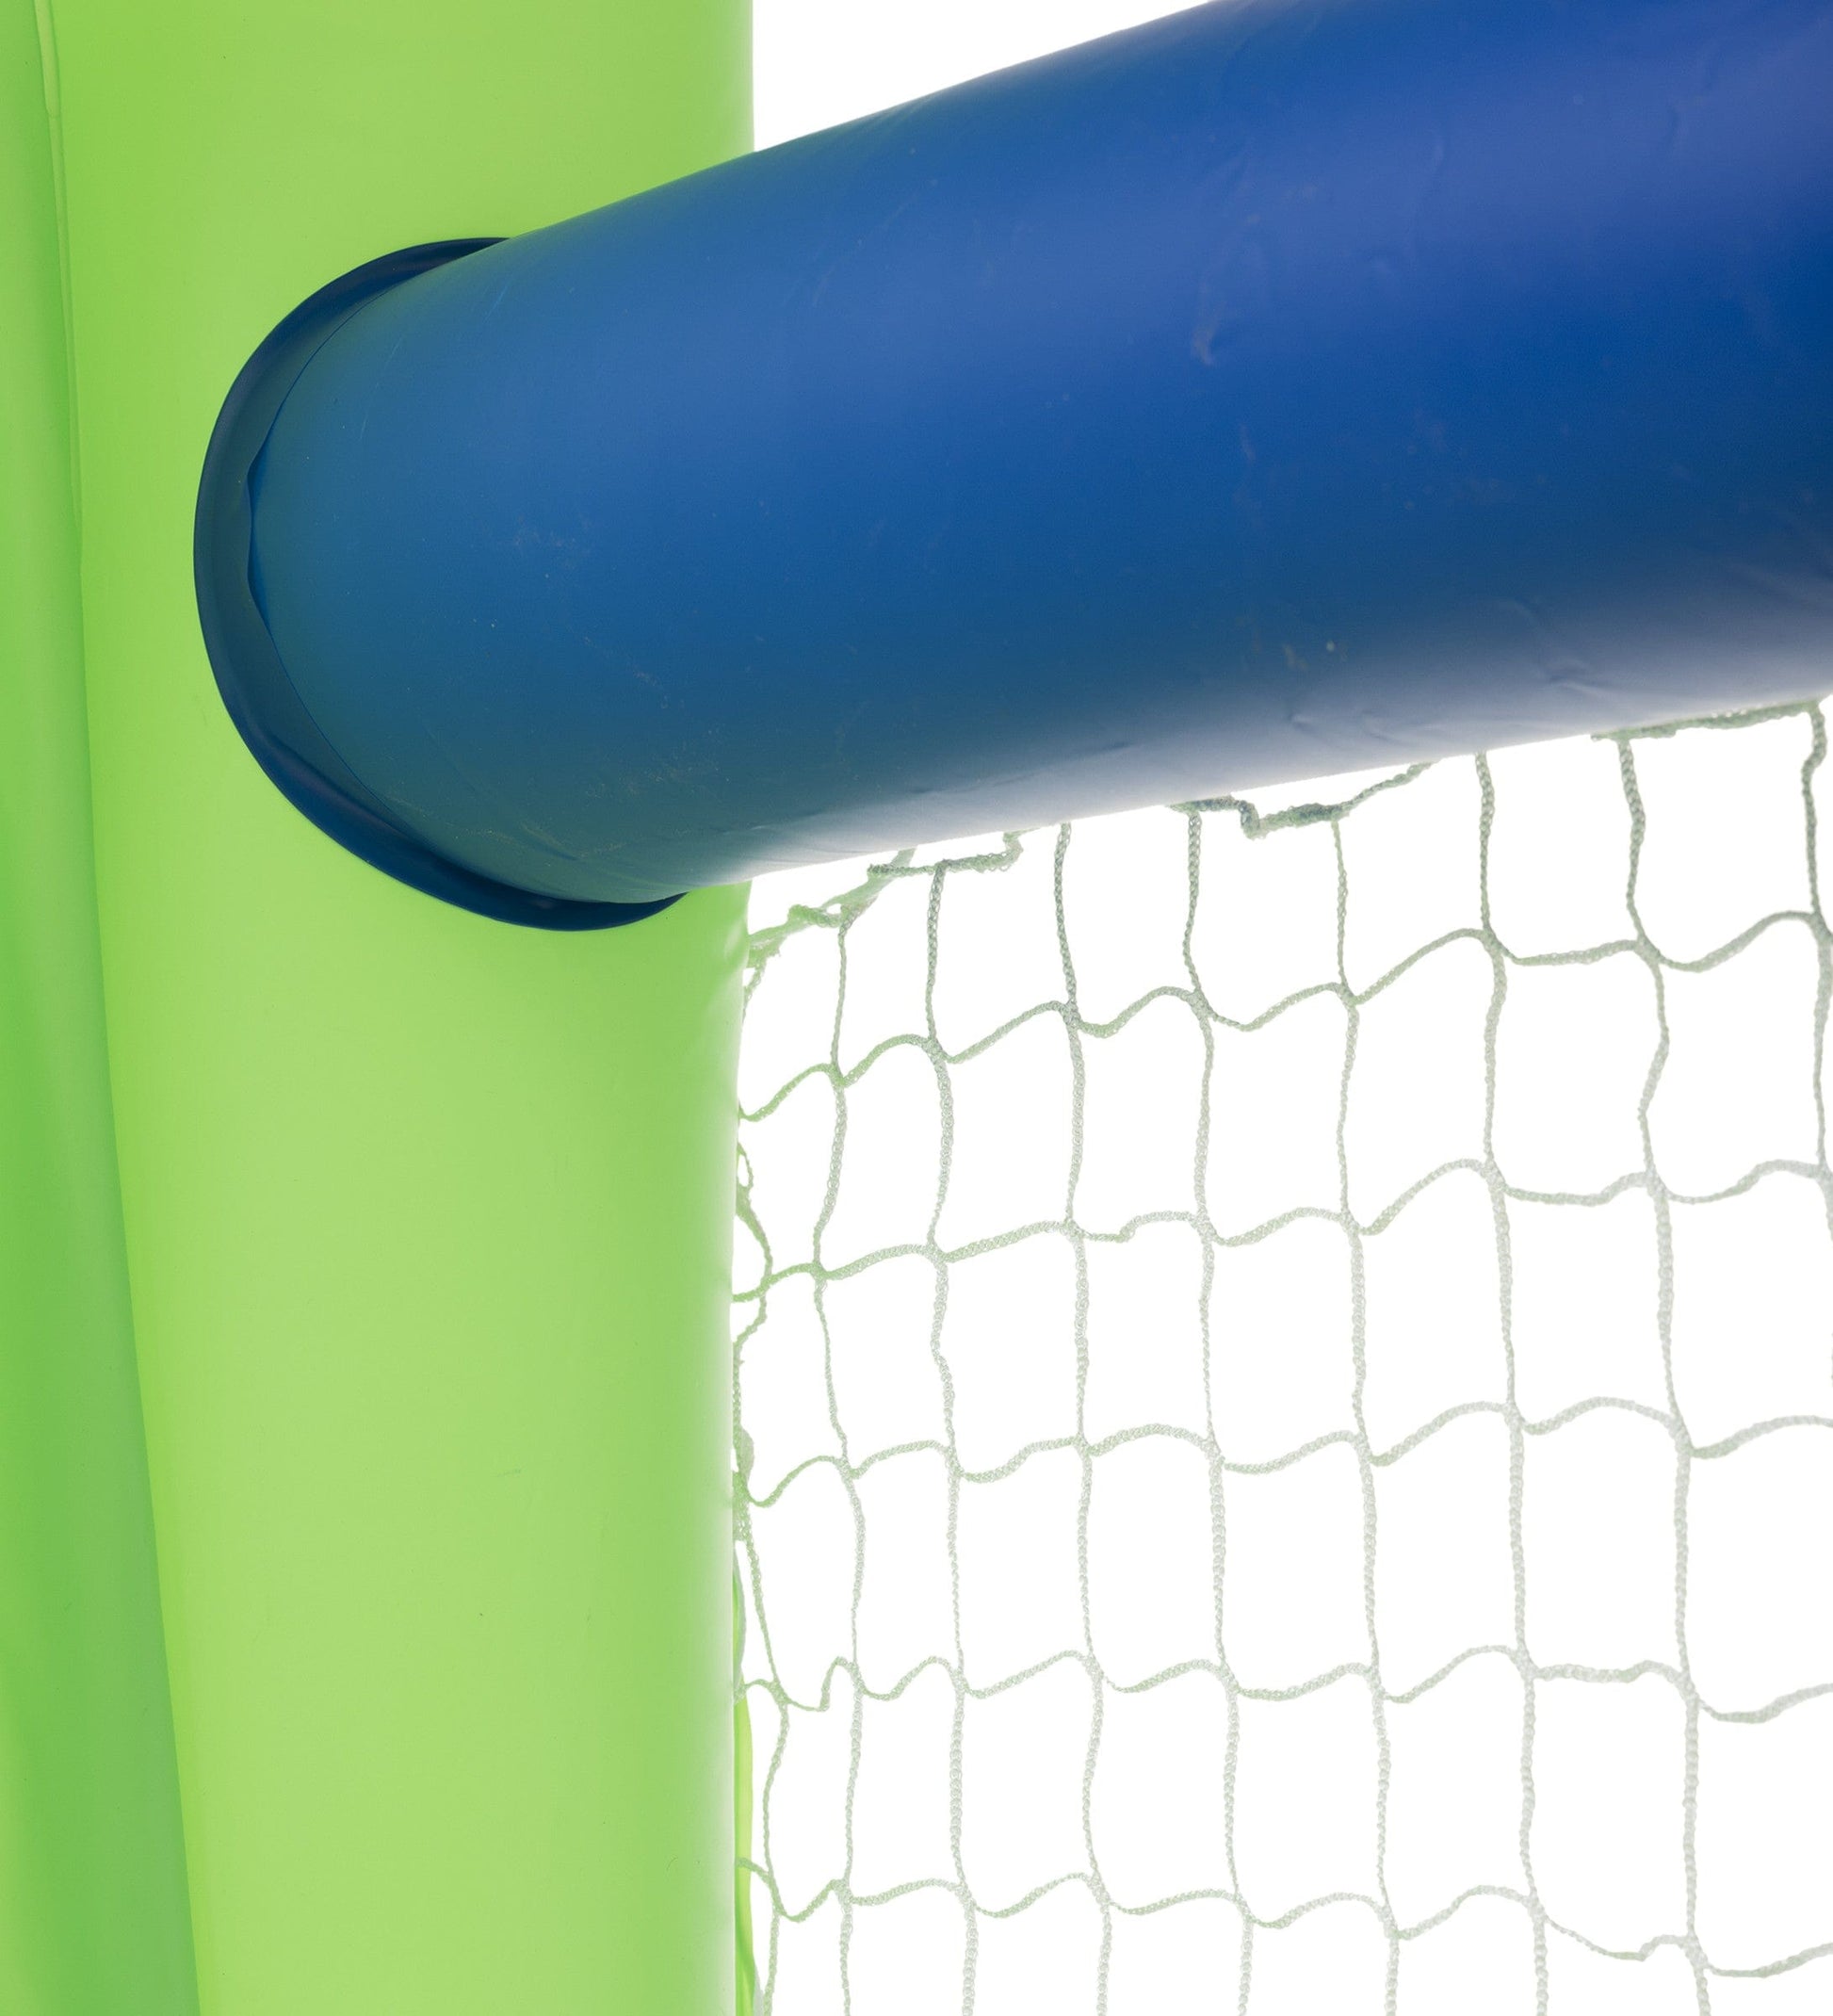 Giant Double-Sided Inflatable Aim 'n Score Basketball and Soccer Game